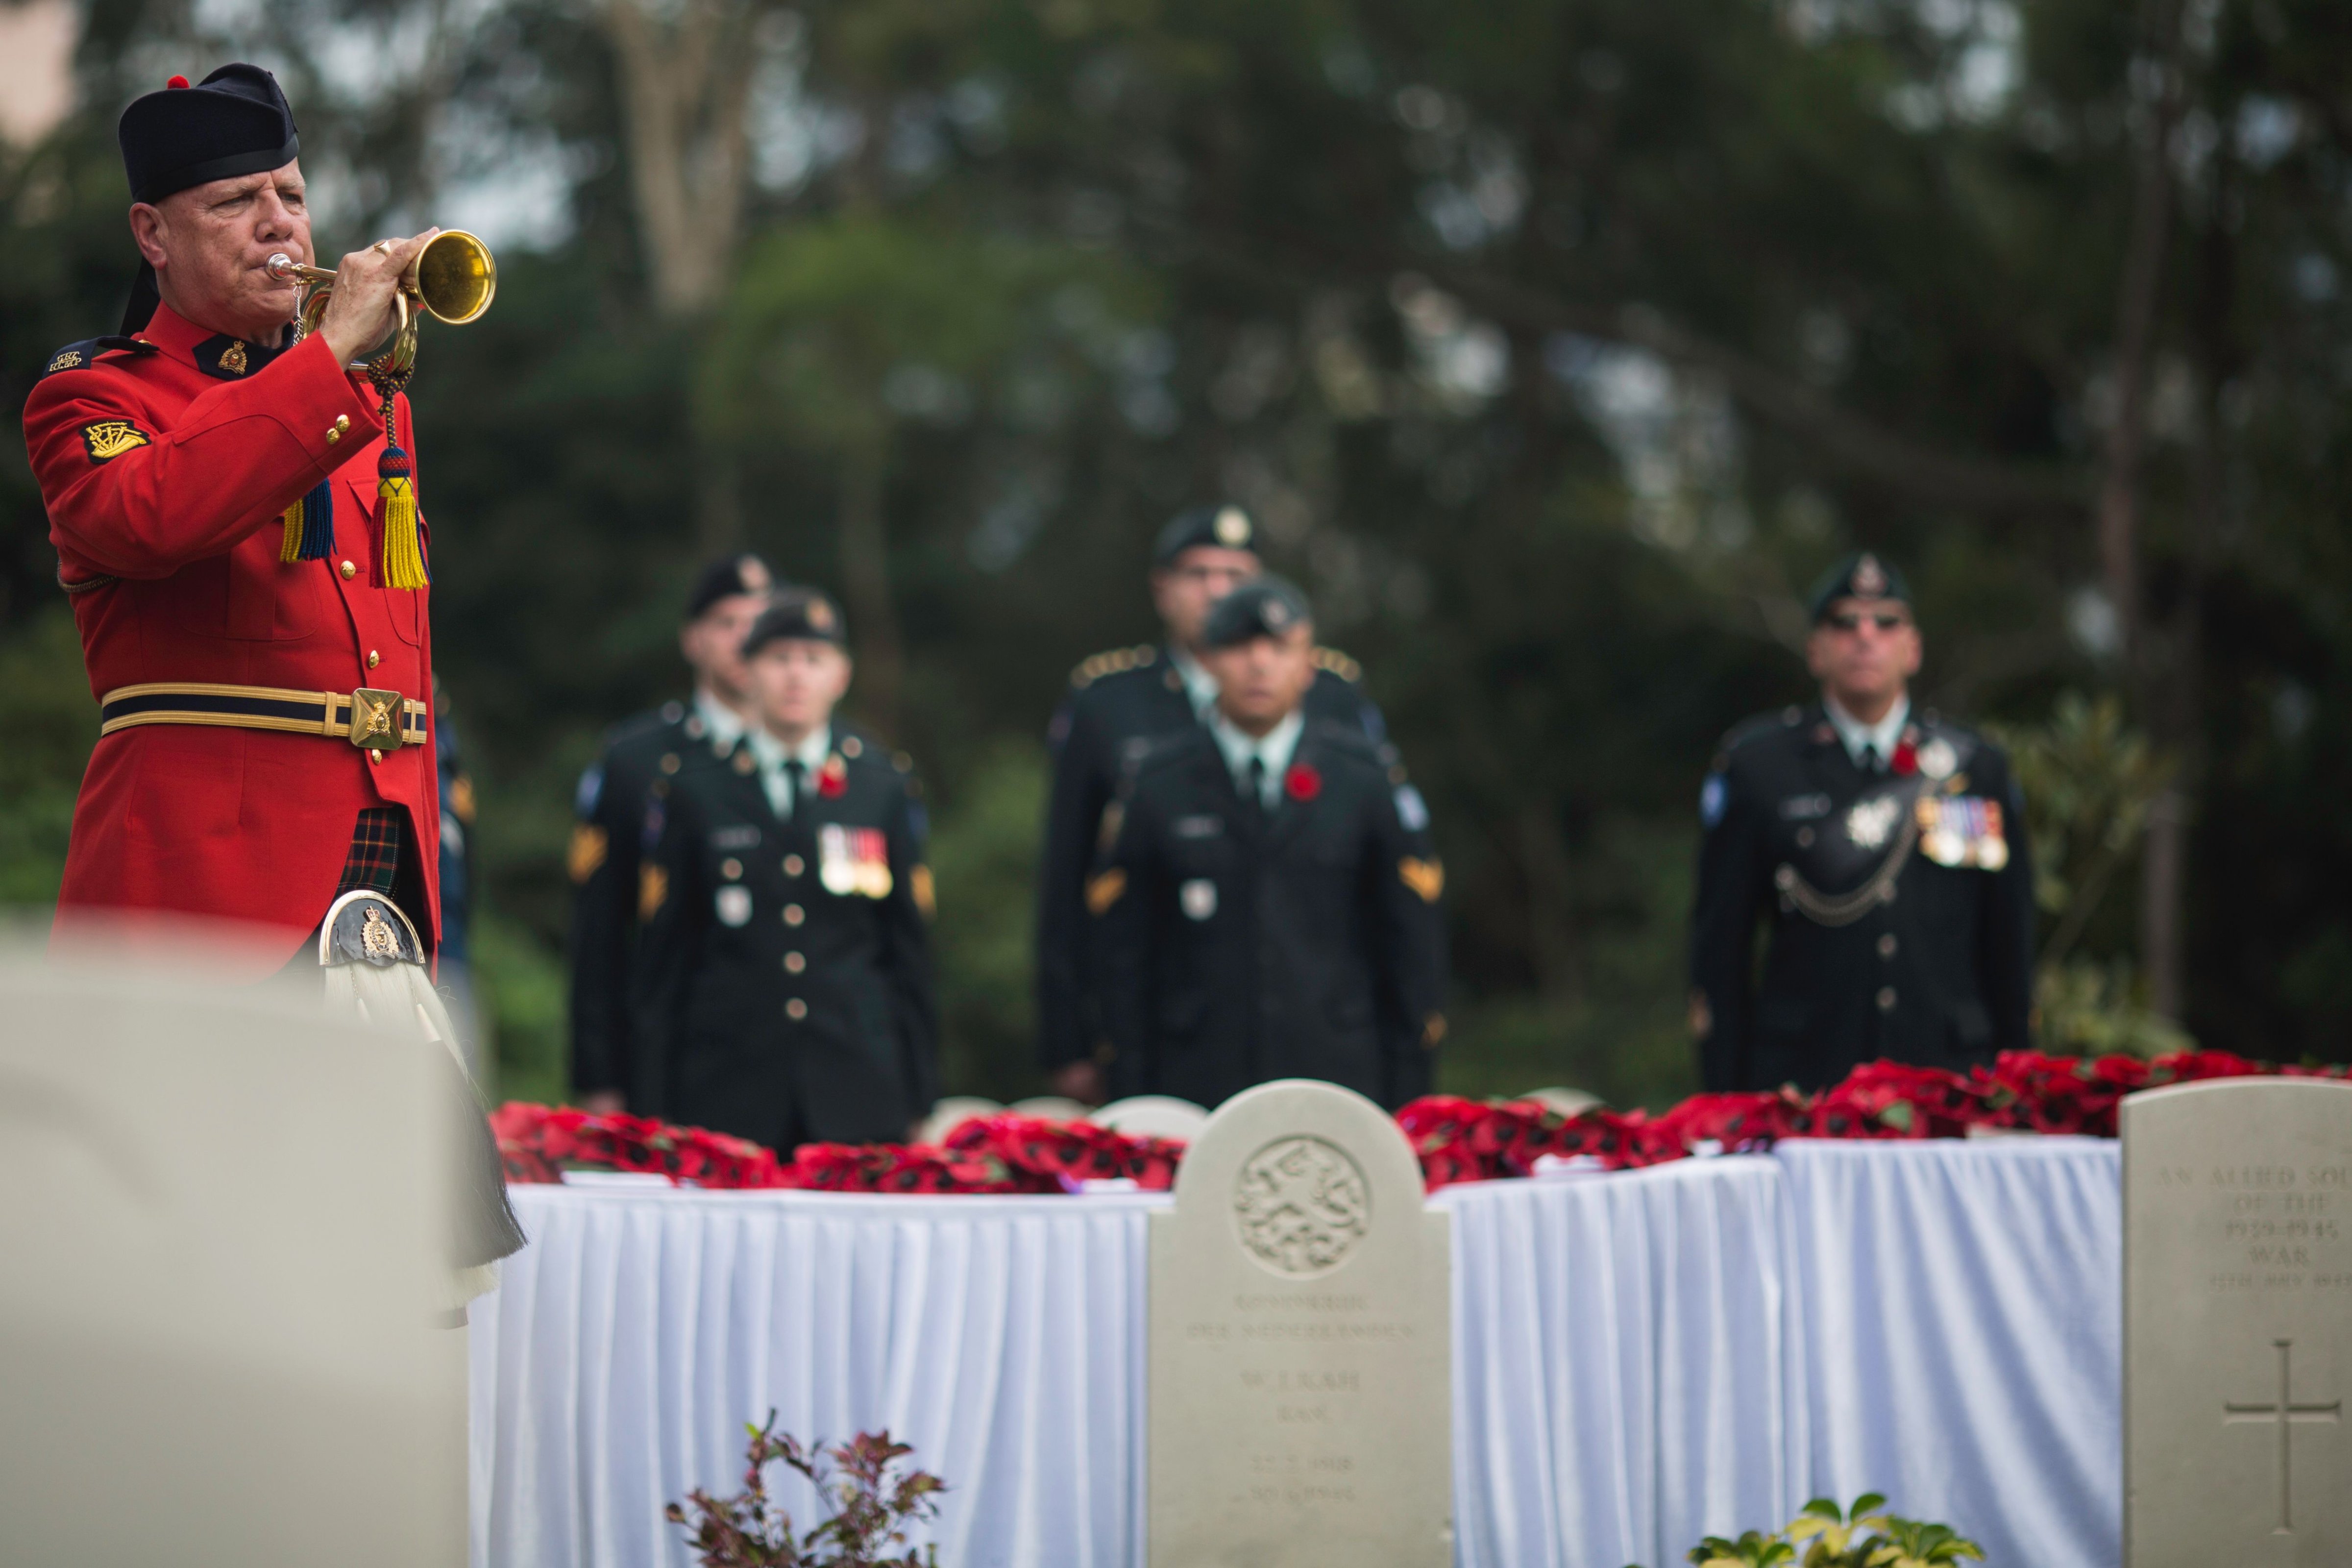 A bugler from the Royal Canadian Mounted Police plays the Last Post in Hong Kong's Sai Wan War Cemetery, on Dec. 4, 2016, during the Canadian commemorative ceremony honoring those who died during the Battle of Hong Kong and World War II (Tengku Bahar—AFP/Getty Images)